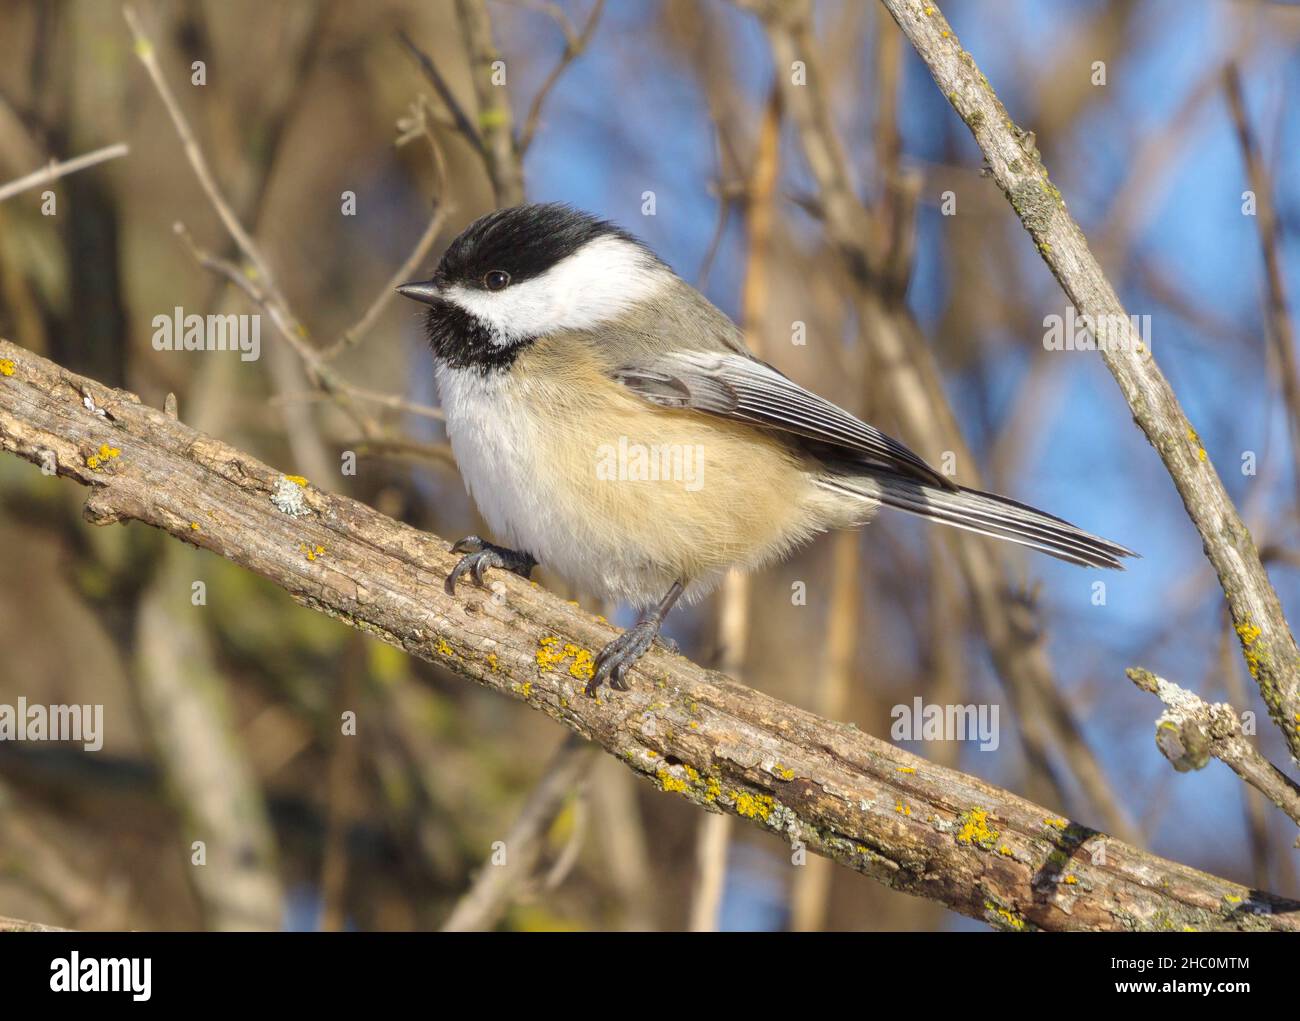 Black-capped Chickadee, Poecile atricapilla perched on branch Stock Photo